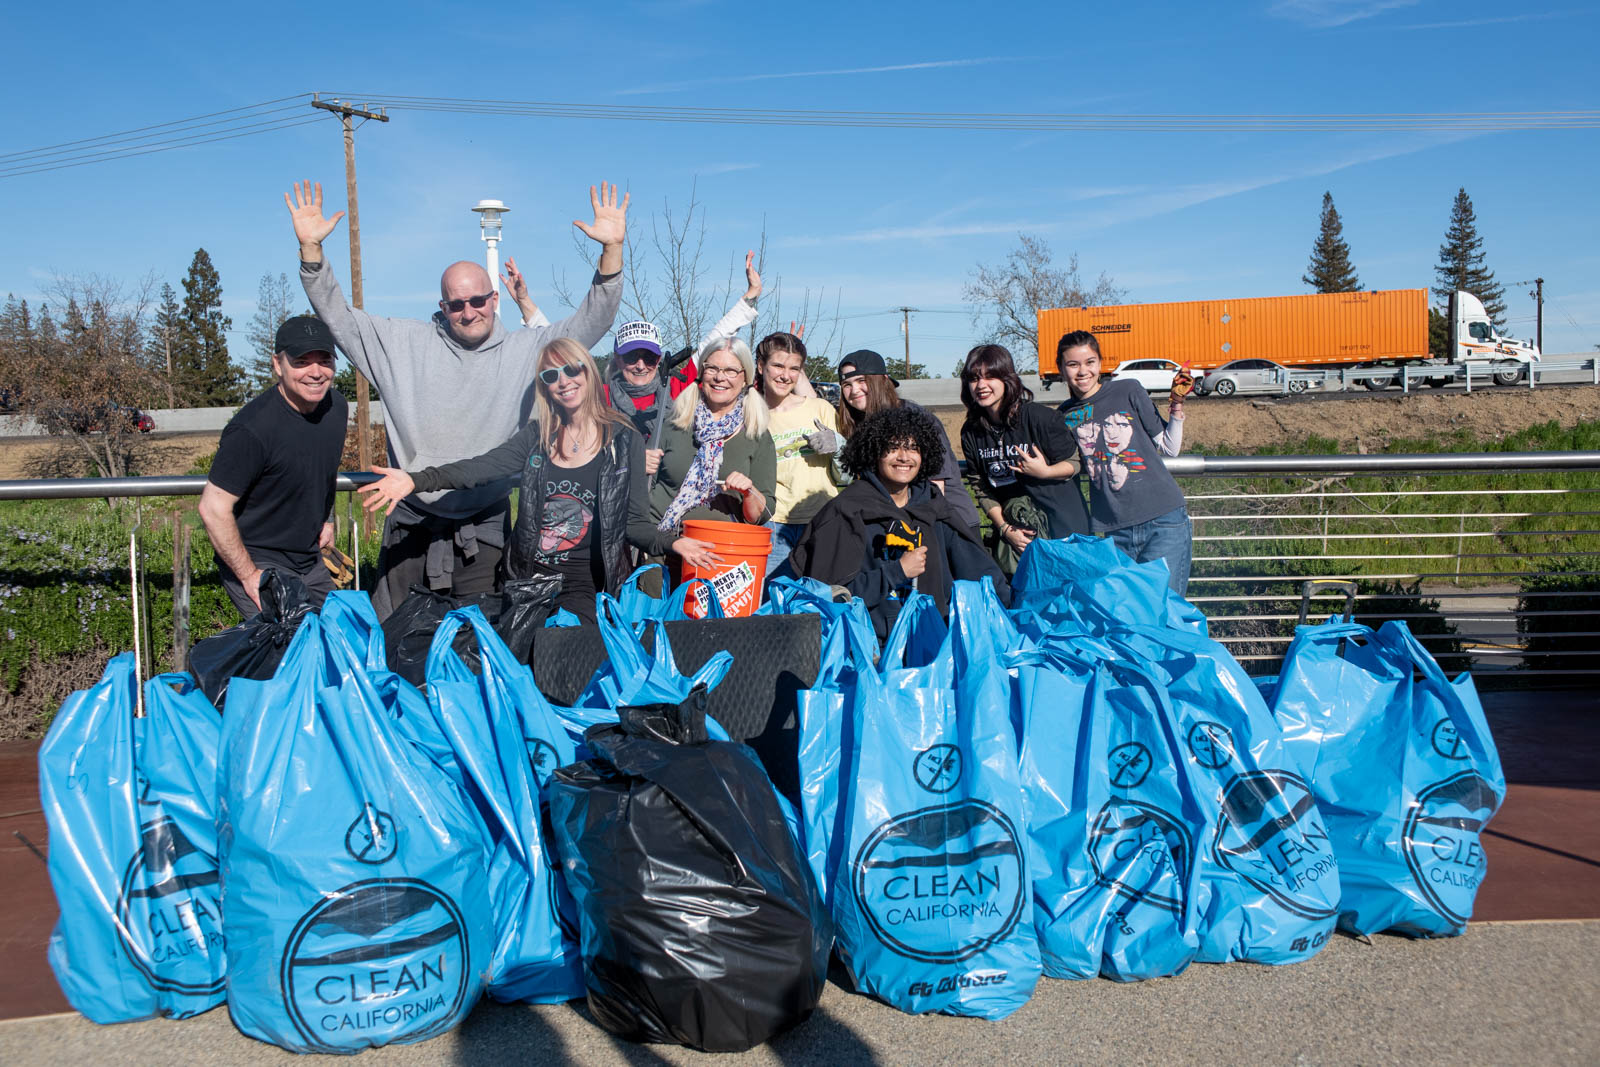 Volunteers from the Sacramento Kings NBA organization and Sacramento Picks It Up! join the Caltrans Stormwater and Clean California campaign teams for a celebratory group photo behind a pile of more than a dozen large, blue, Clean California-branded garbage bags filled with the trash they picked up at the Clean California Sacramento River Clean Up event. 